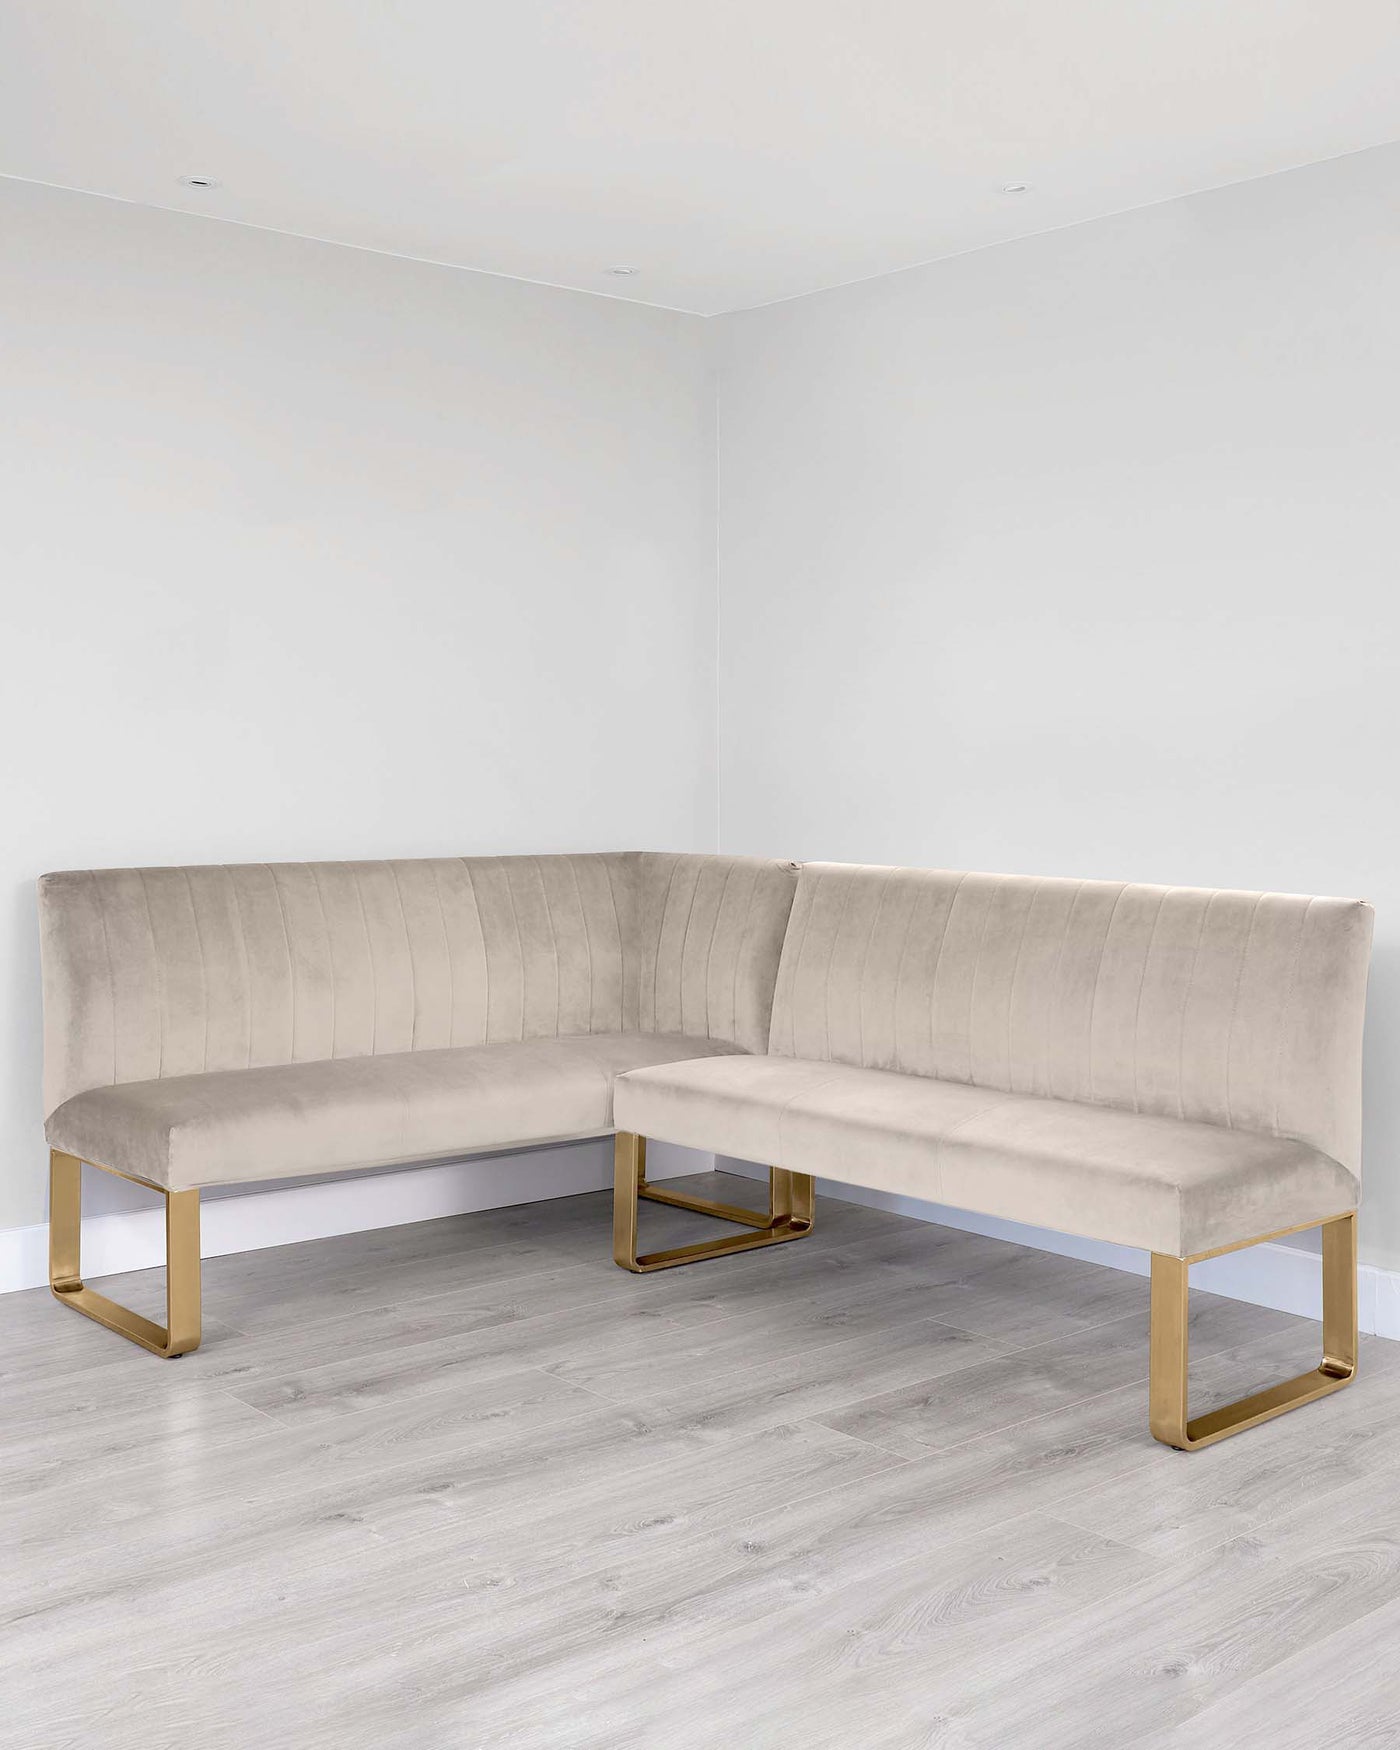 Modern L-shaped sectional sofa with velvet upholstery in a neutral colour, featuring a channel tufted backrest and sleek metallic gold legs. The sofa is presented in a minimalist setting with light wood flooring and white walls.